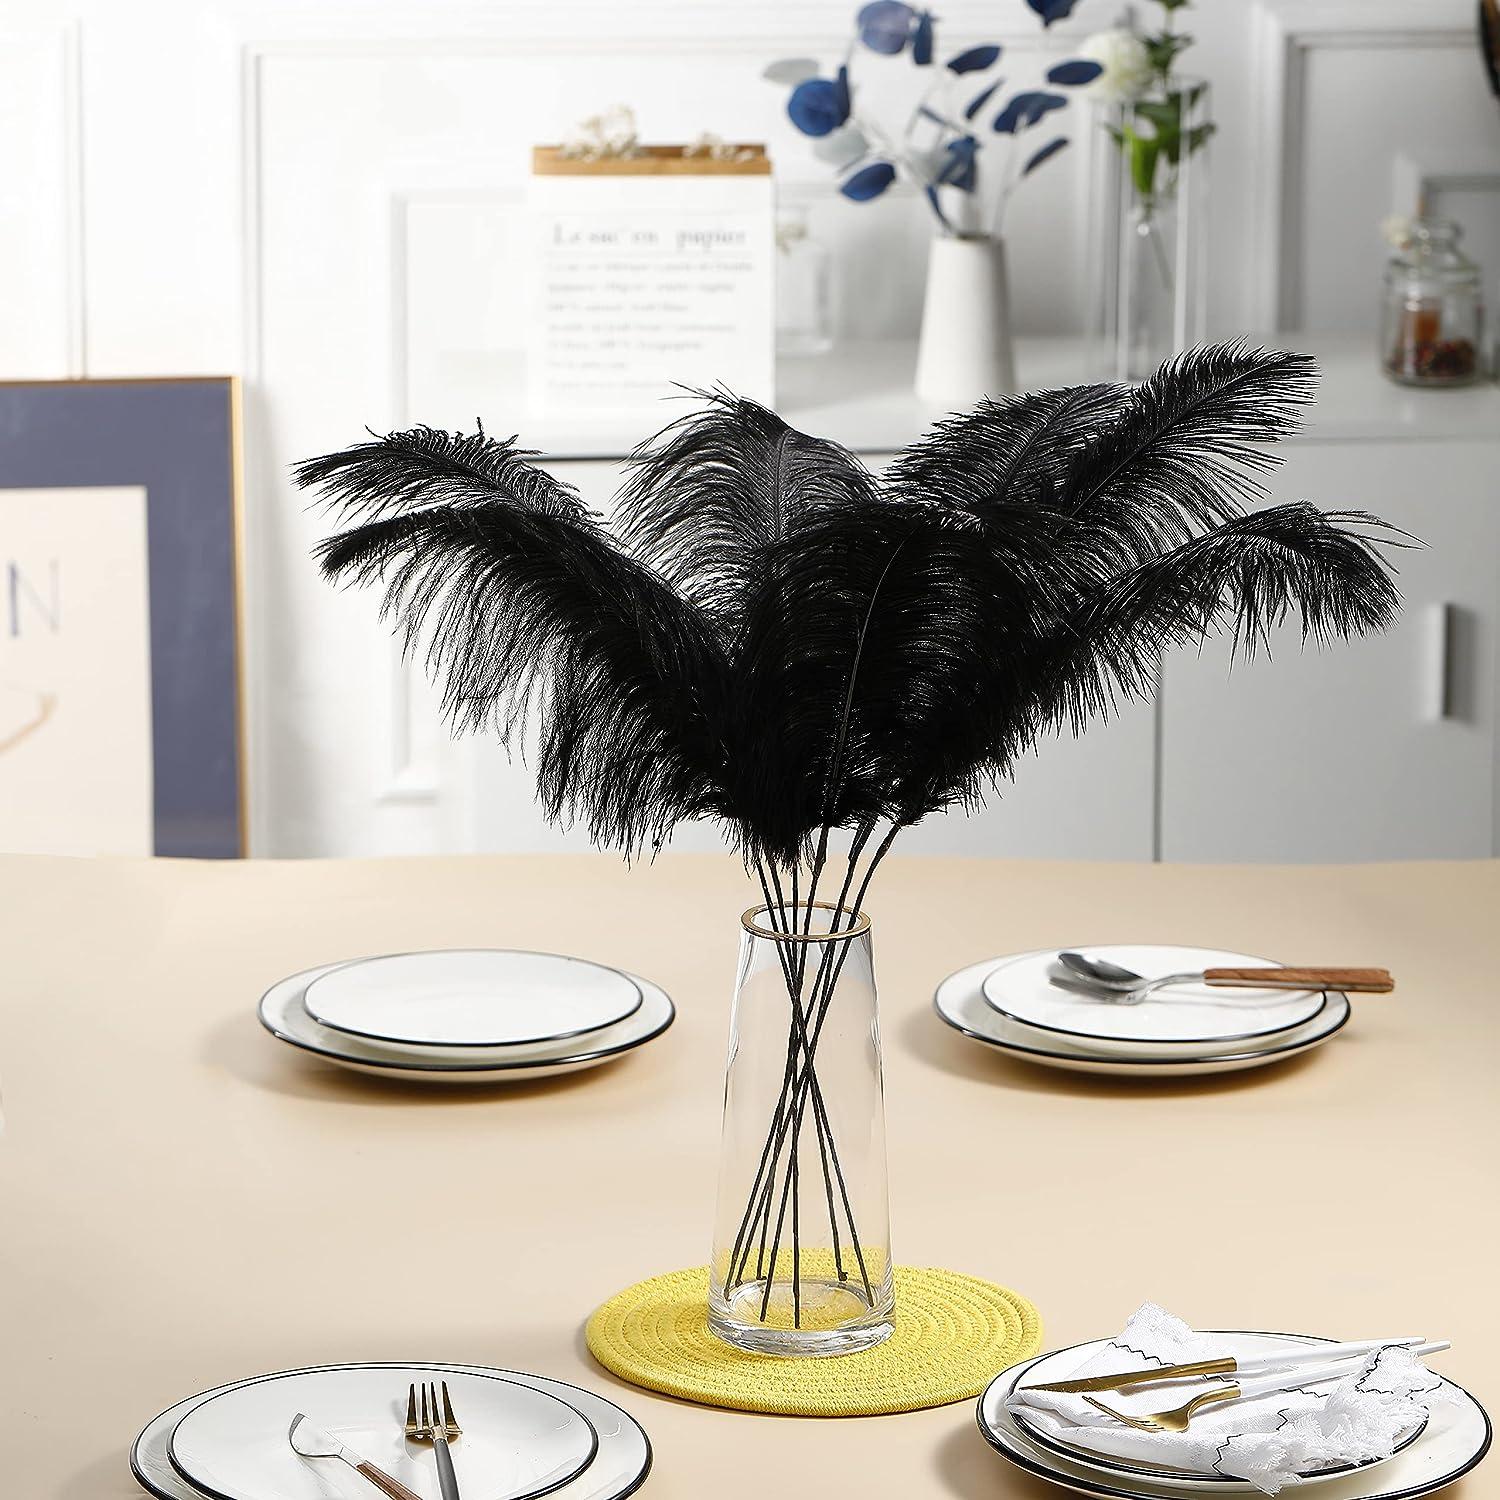  Black Feathers For Centerpieces